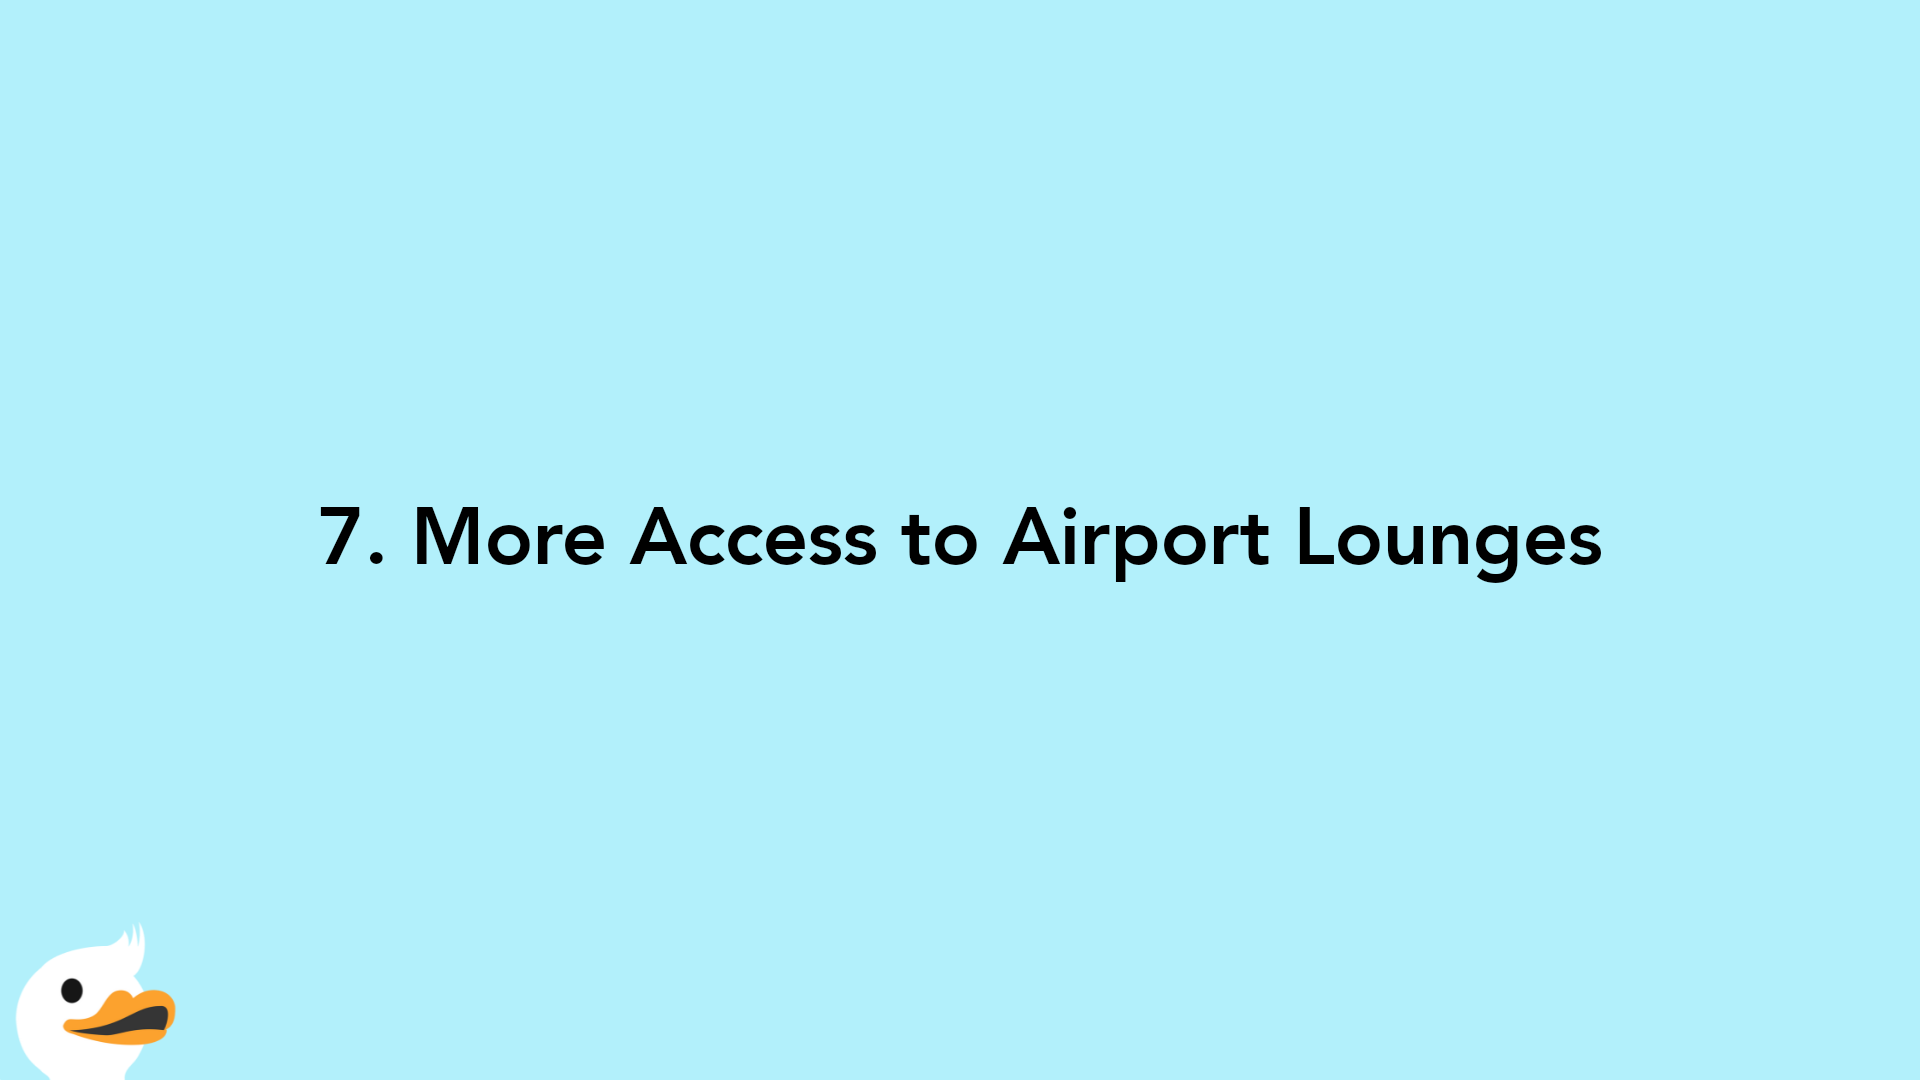 7. More Access to Airport Lounges